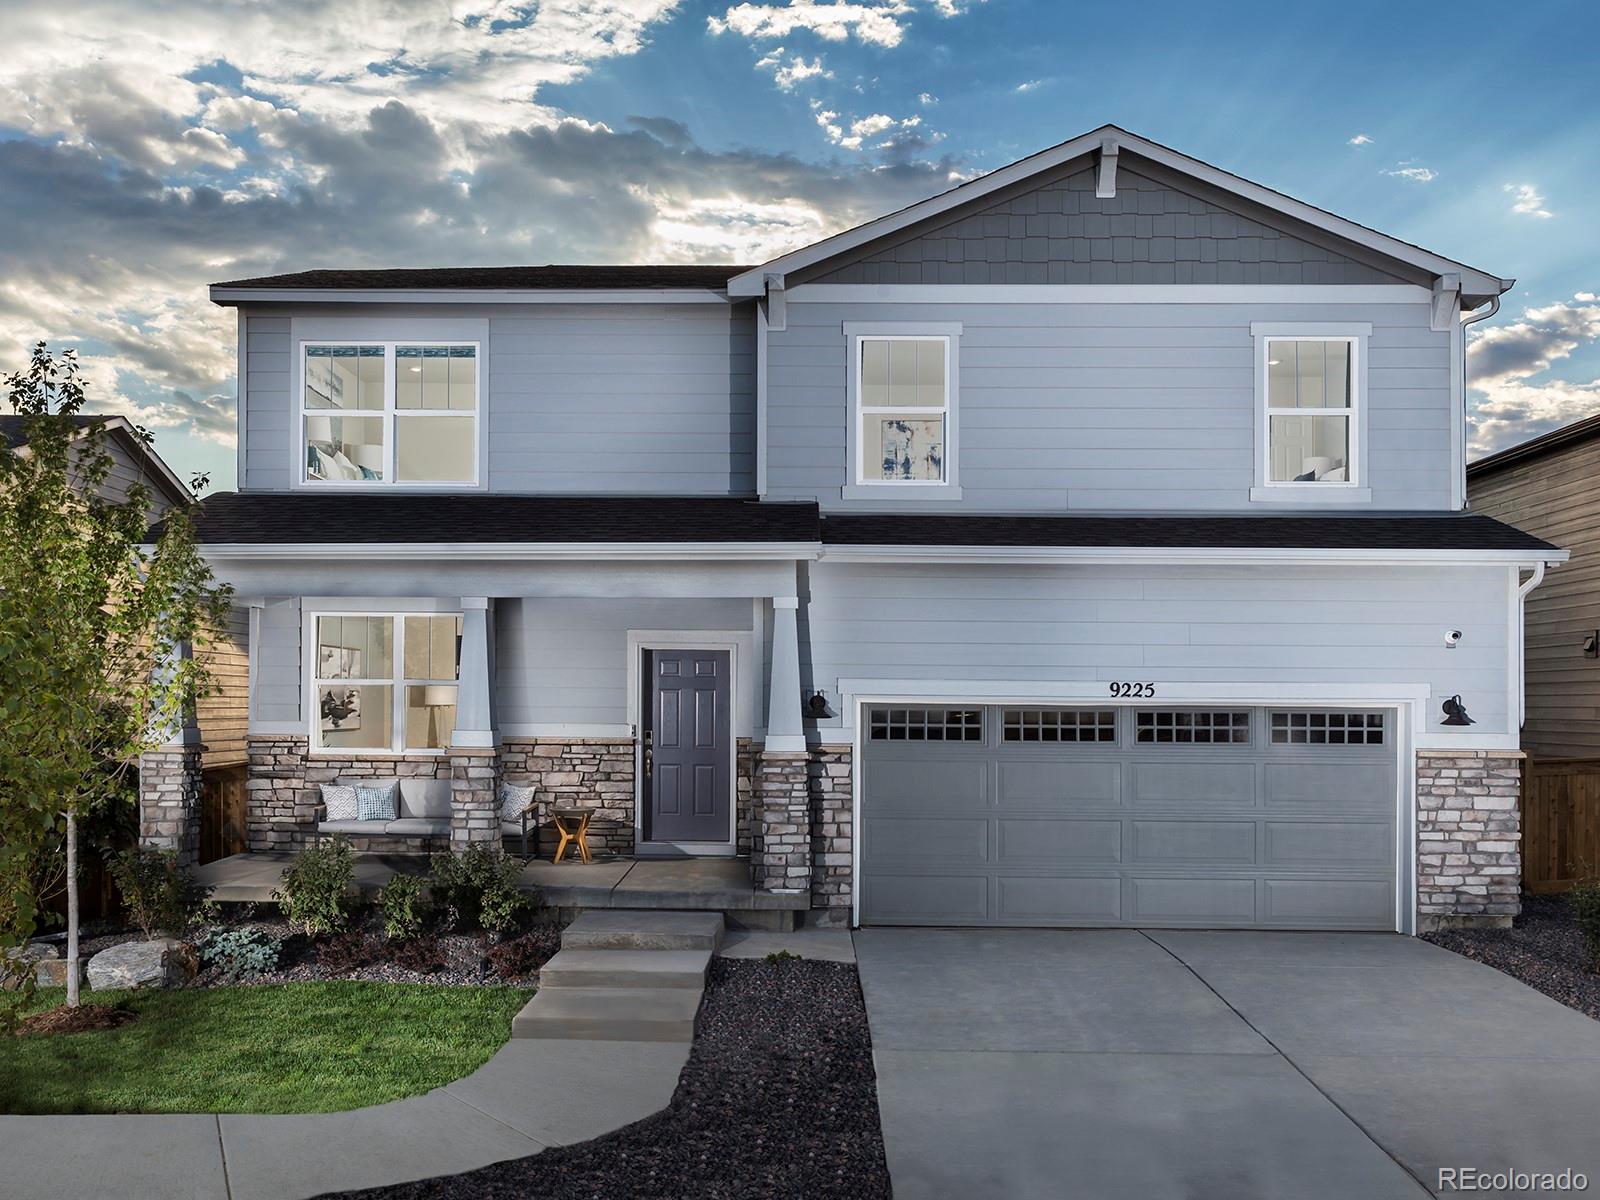 9160  Pitkin Street, commerce city MLS: 2026389 Beds: 4 Baths: 3 Price: $634,990